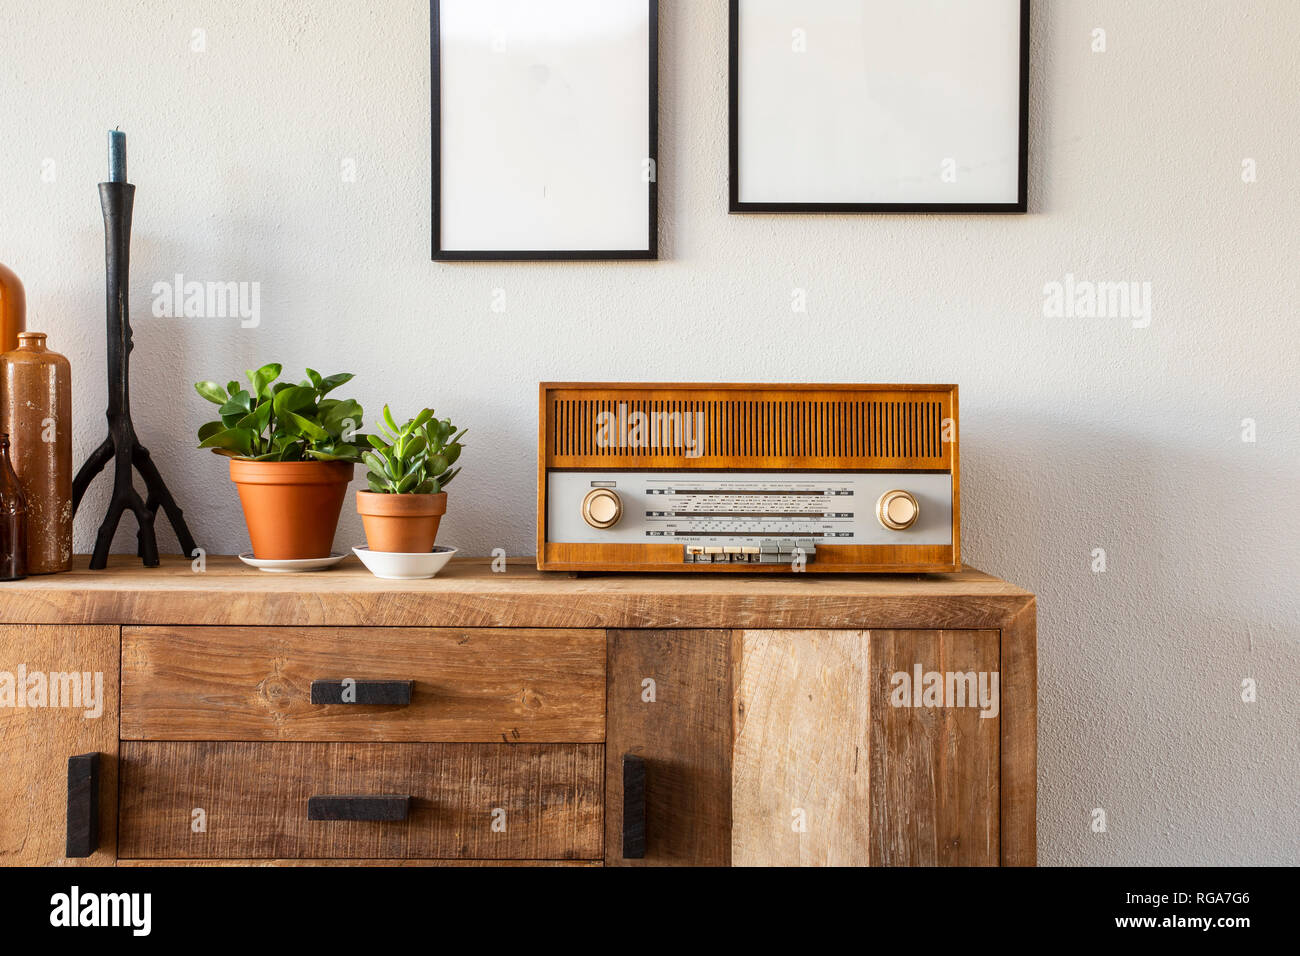 Retro Living Room Cabinet High Resolution Stock Photography And Images Alamy